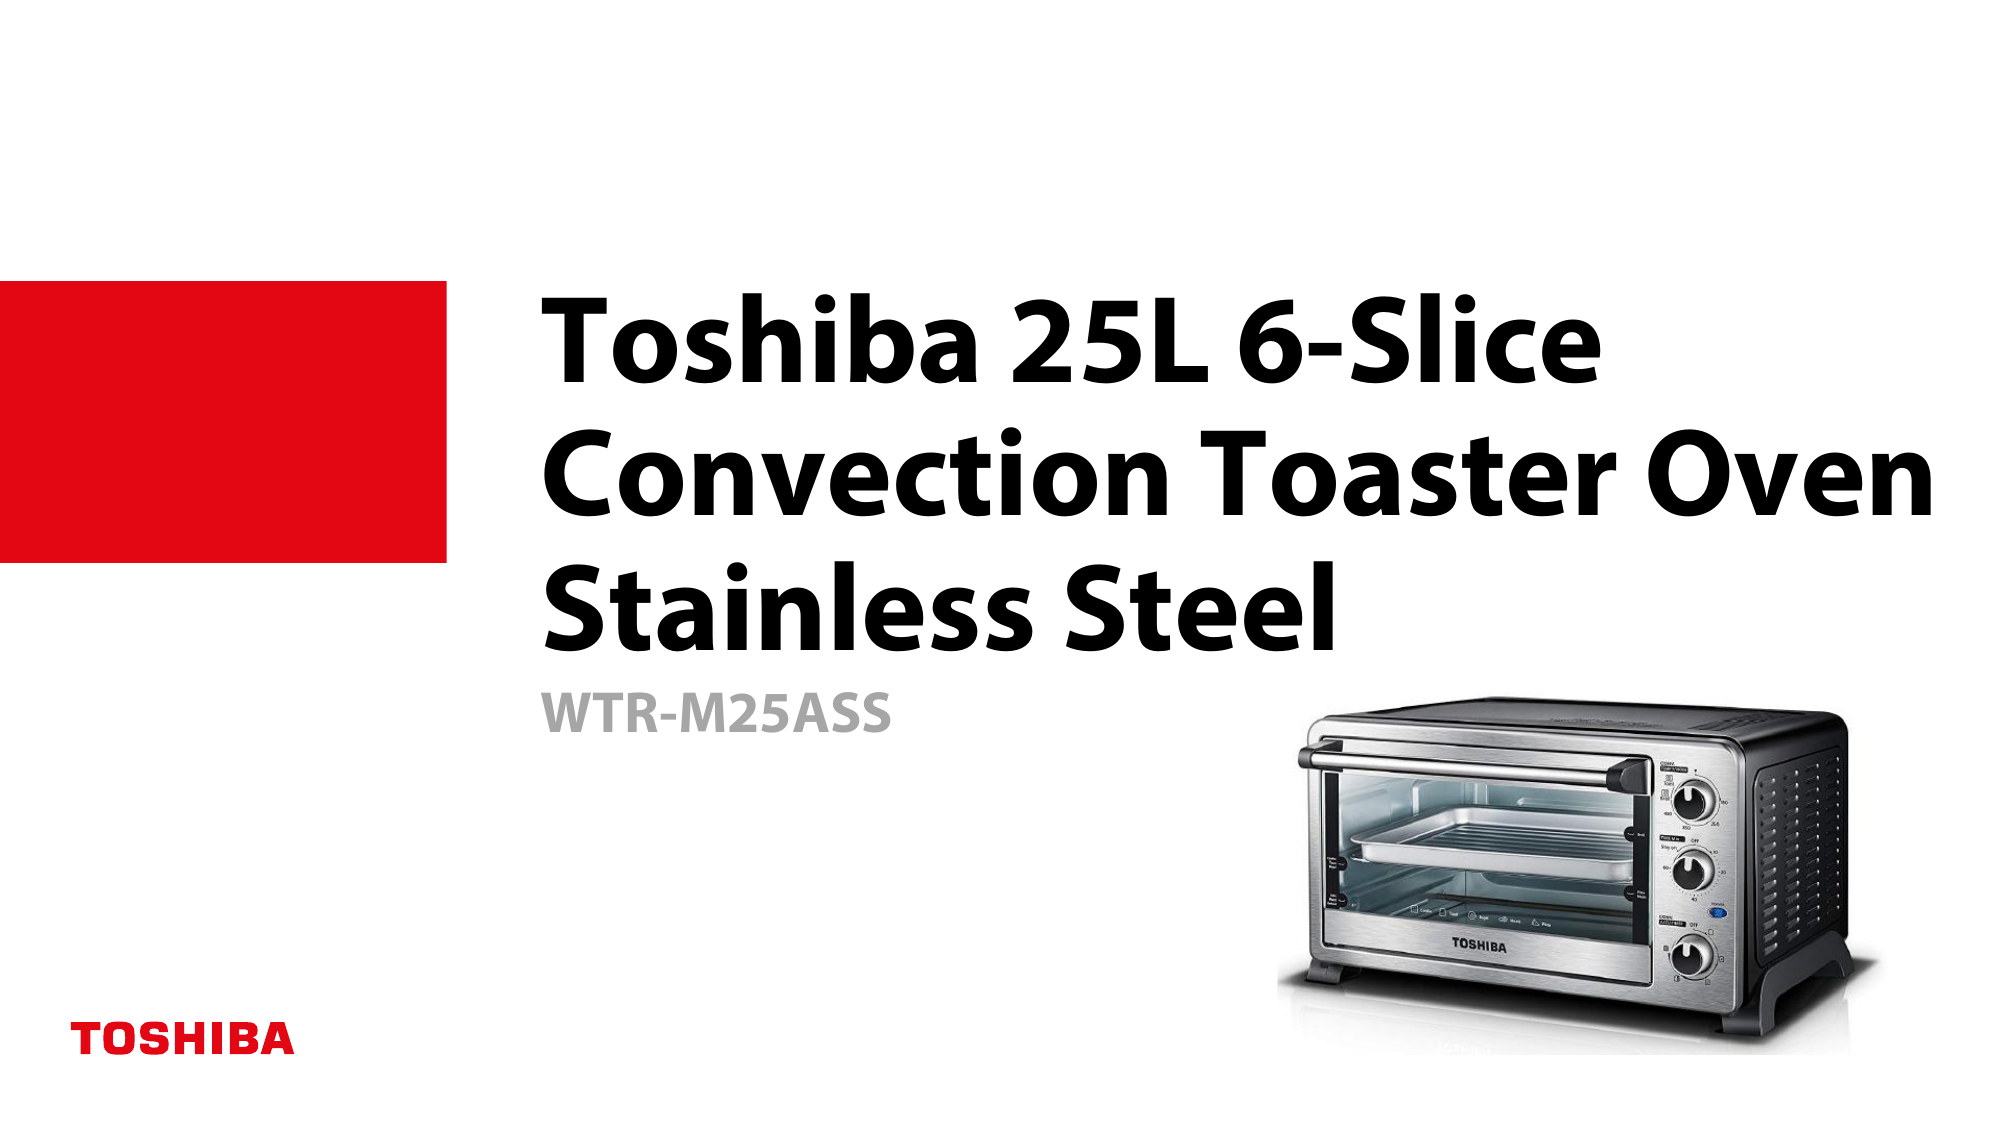 Toshiba WTR-A25ASS Digital Convection Toaster Oven, 6-Slice, 1500 Watts,  Stainless Steel